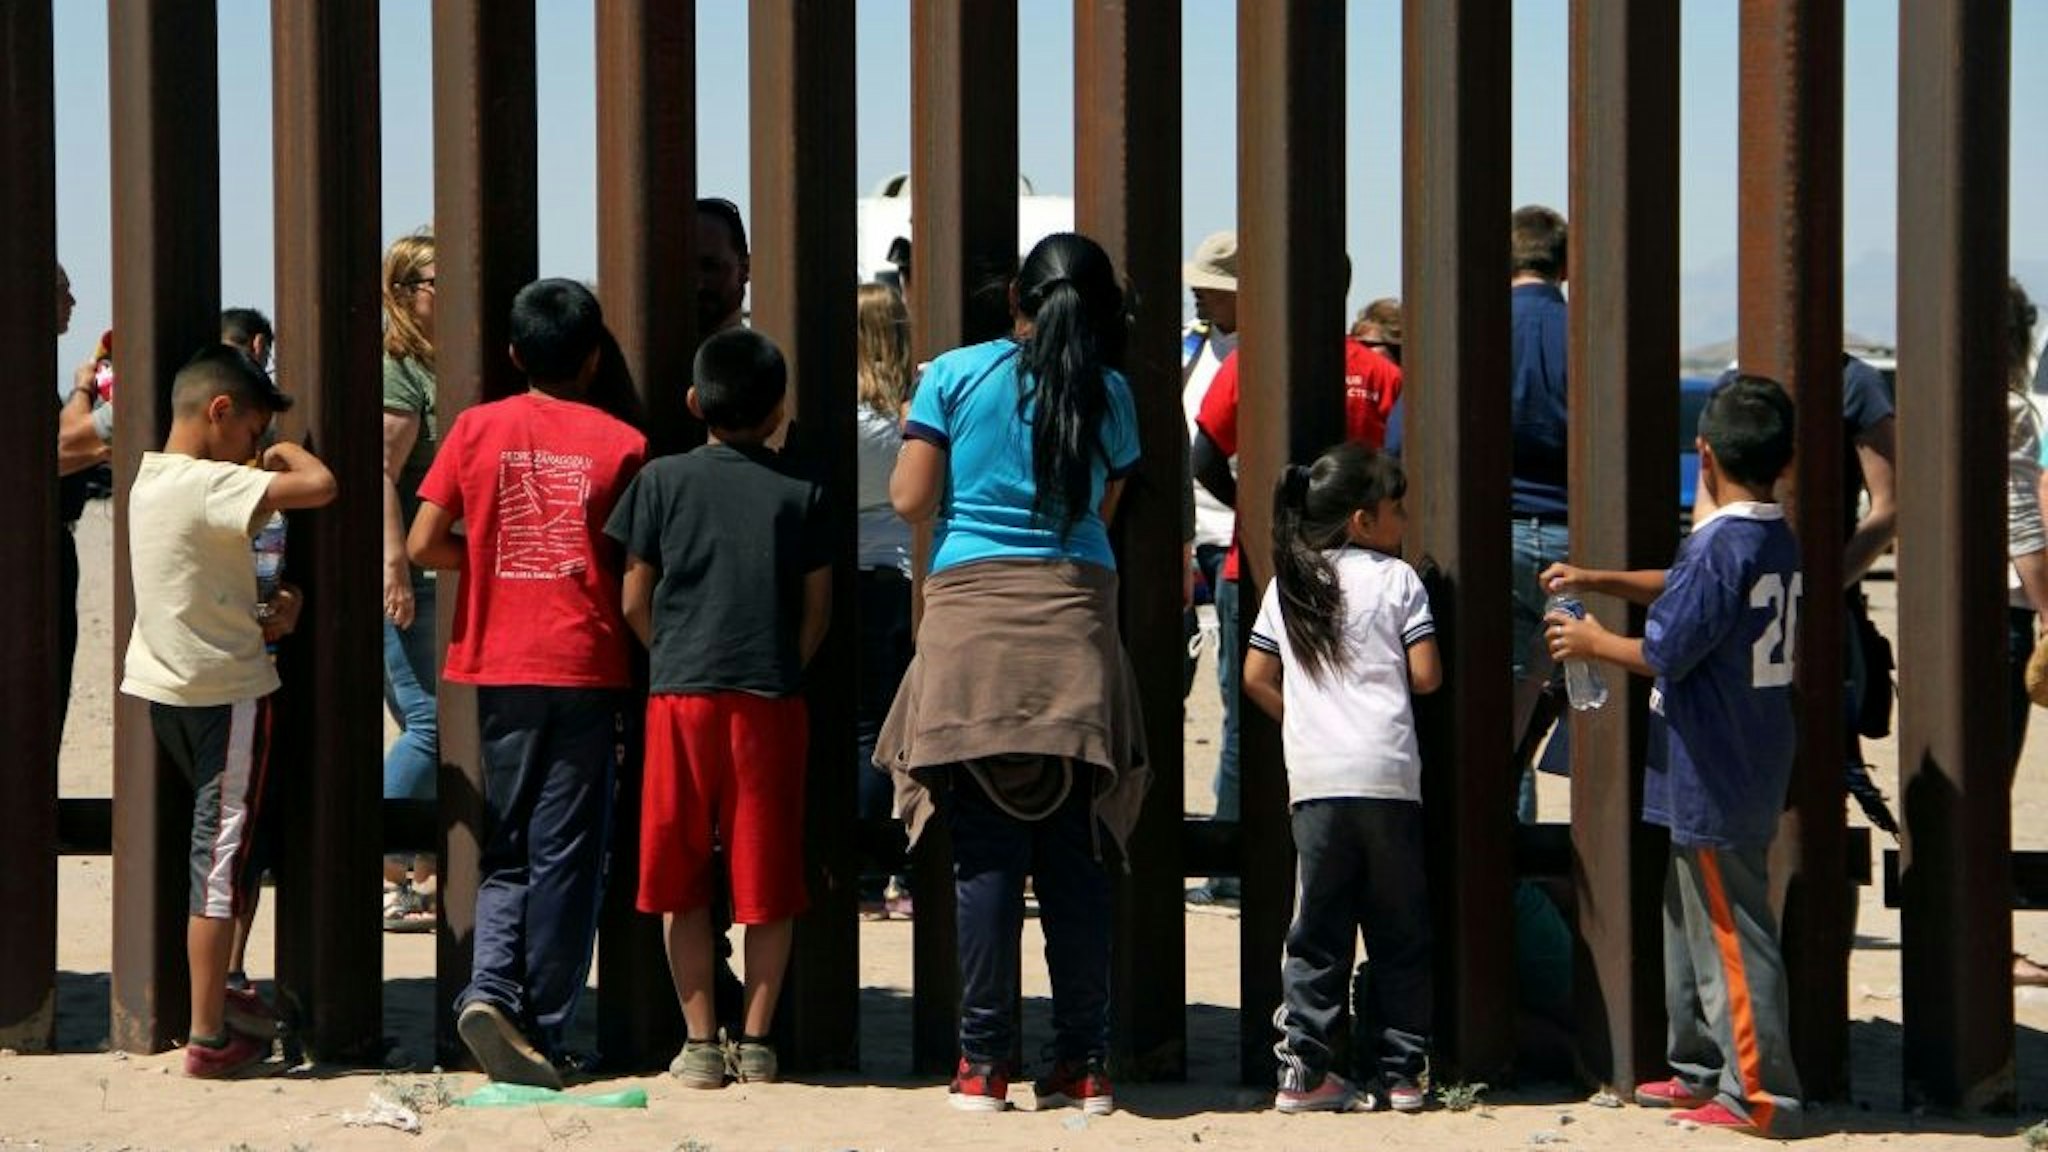 Children from the Anapra area observe a binational prayer performed by a group of religious presbyters on the border wall between Ciudad Juarez, Chihuahua state, Mexico and Sunland Park, New Mexico, US, on May 3, 2018. (Photo by Herika Martinez / AFP) (Photo credit should read